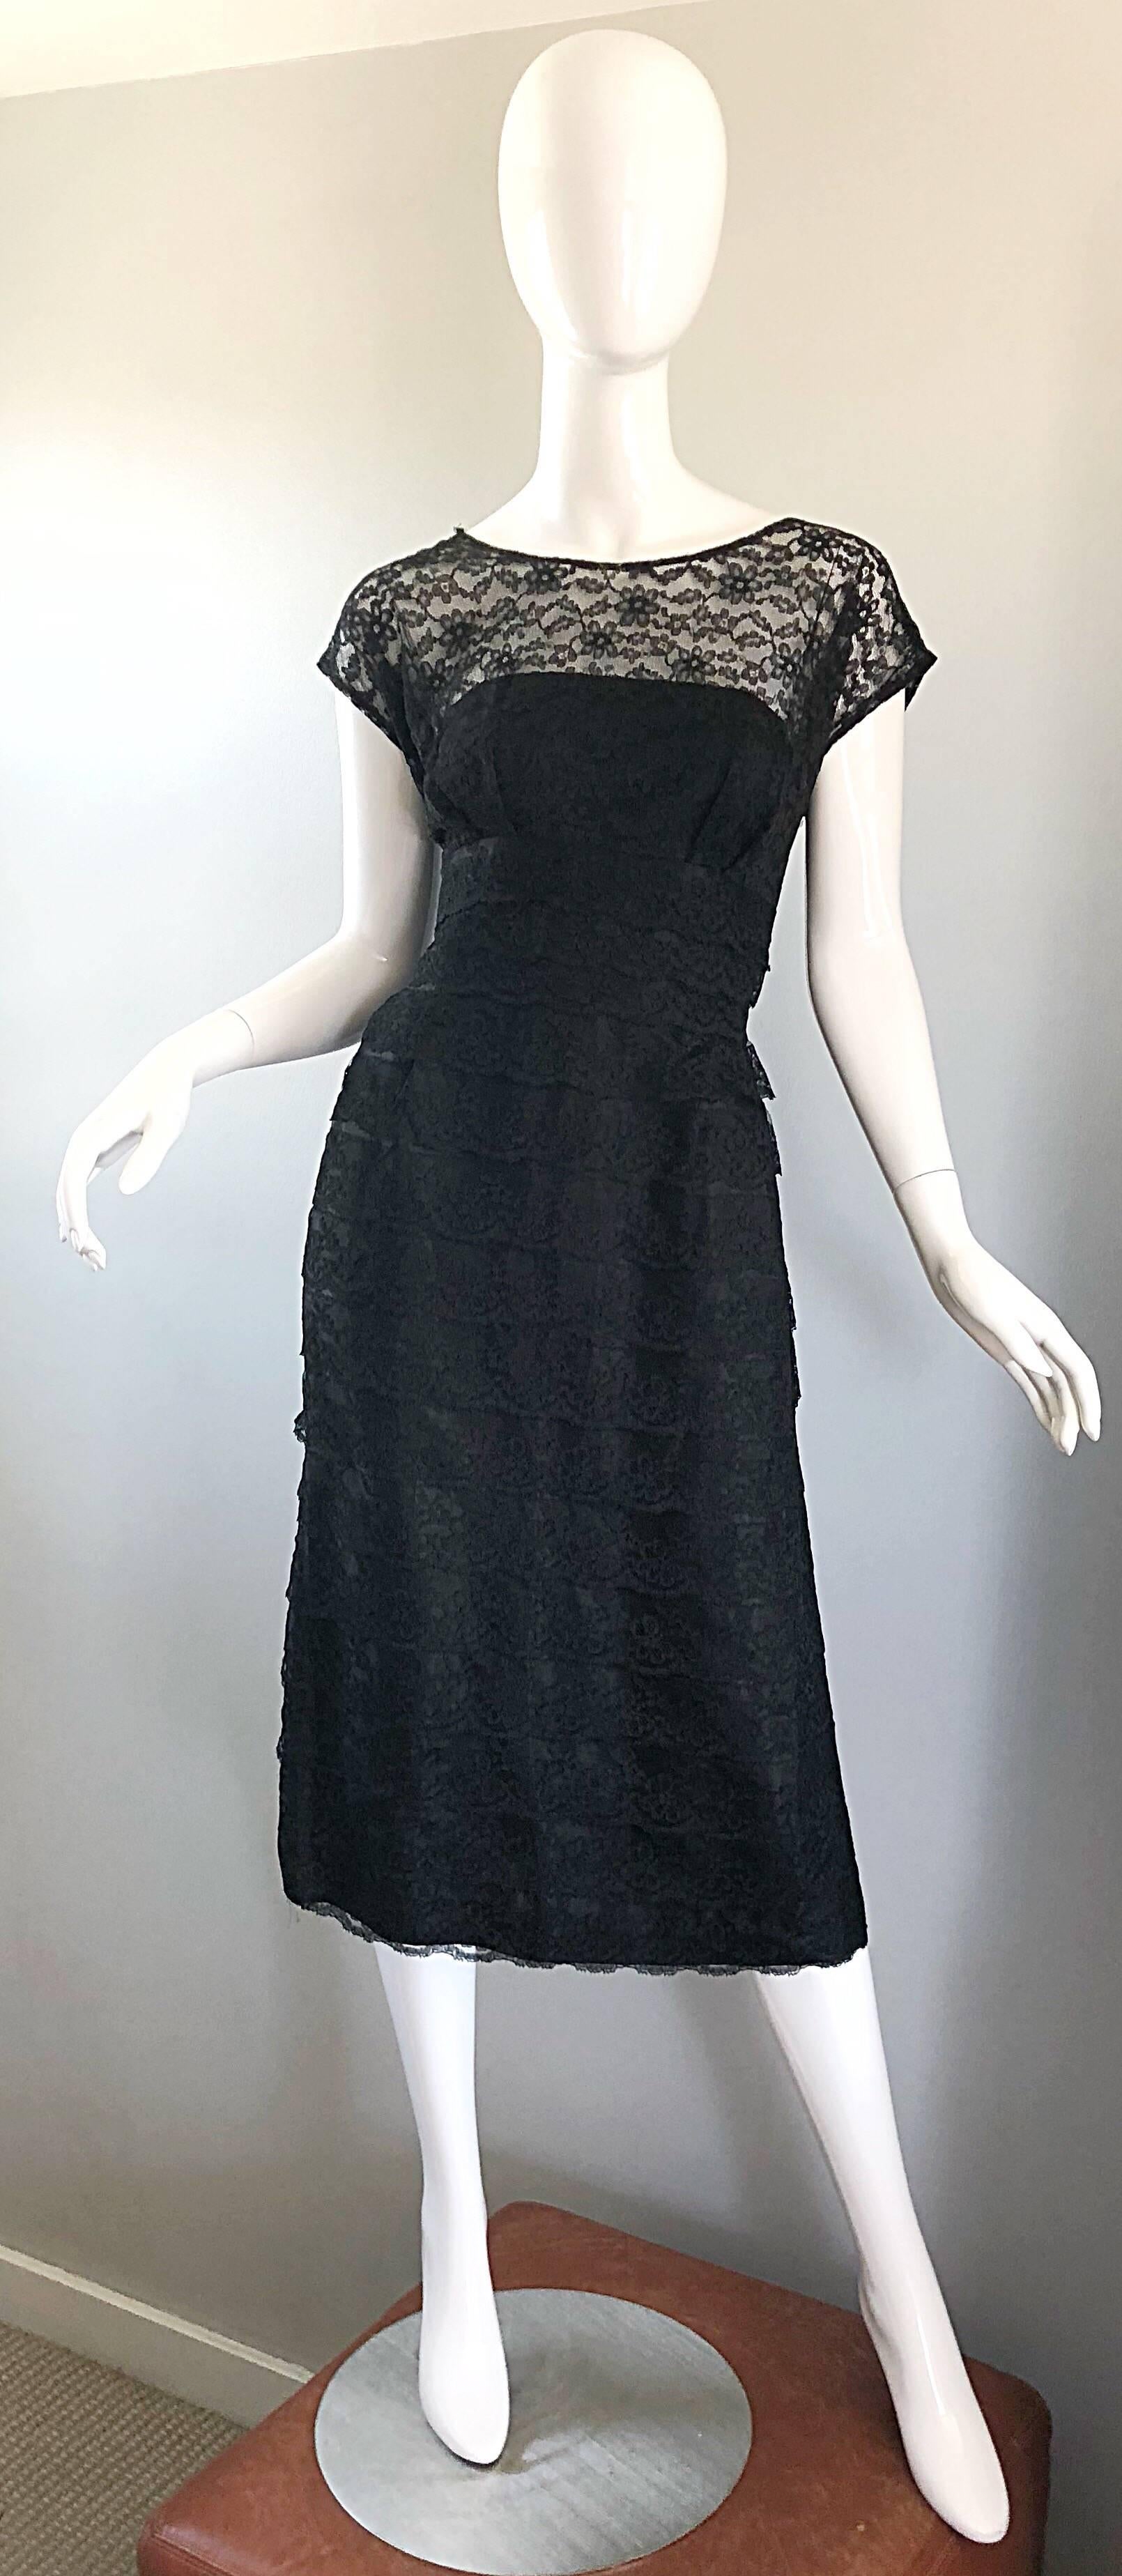 Chic 1950s black French lace cocktail dress! Features luxurious black French lace, with a fitted bodice and flattering forgiving skirt. Full metal zipper with hook-and-eye closure. Couture quality, with heavy attention to detail. The perfect classic